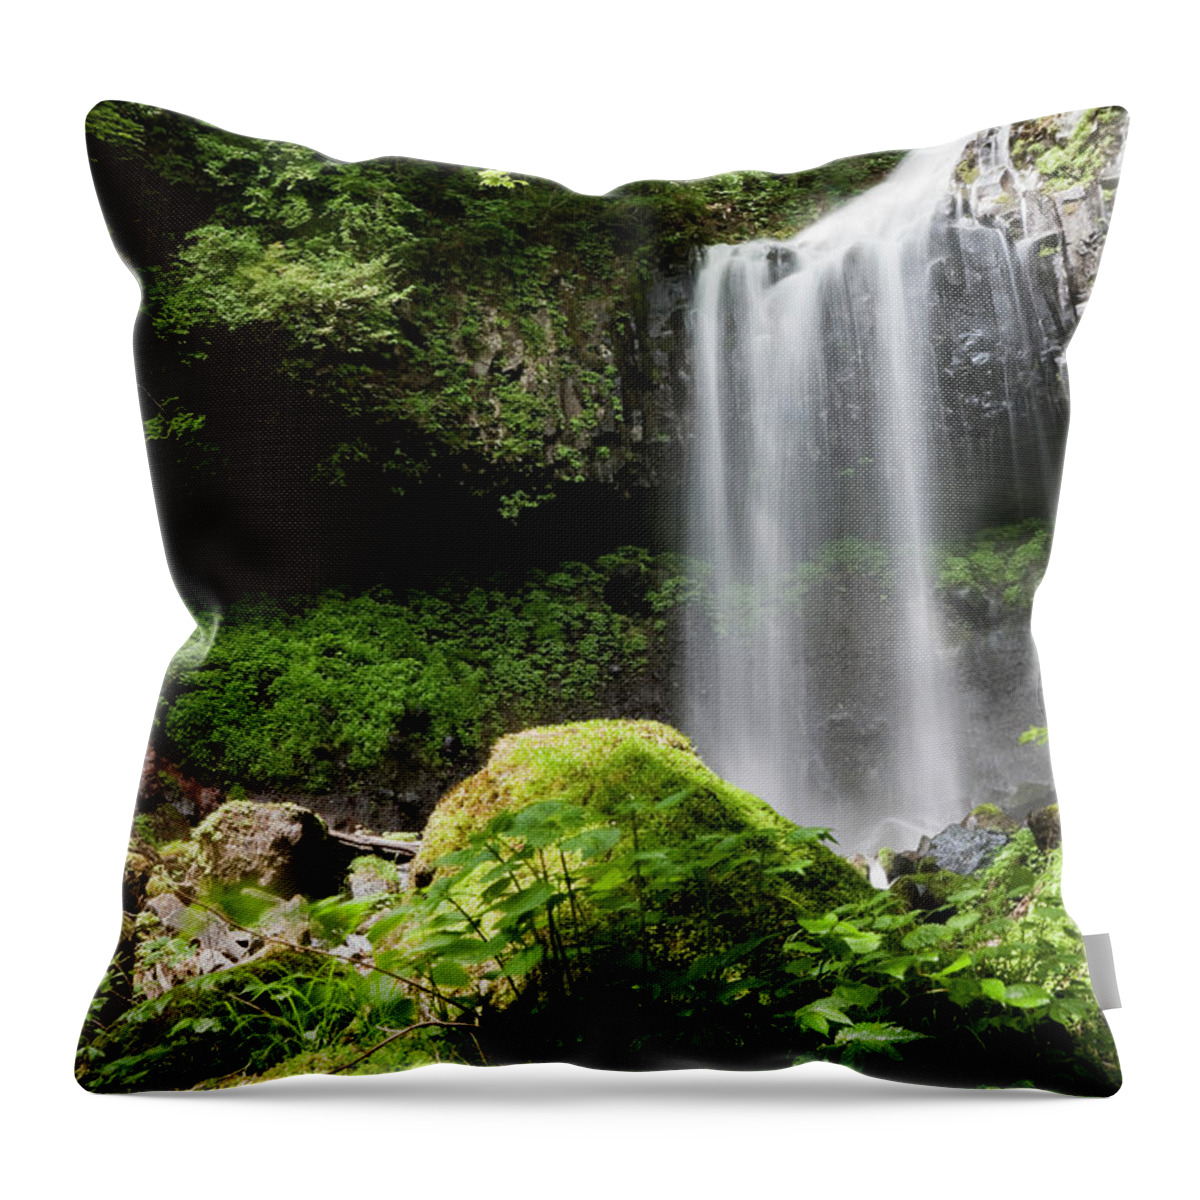 Scenics Throw Pillow featuring the photograph Cascading Water by Ooyoo